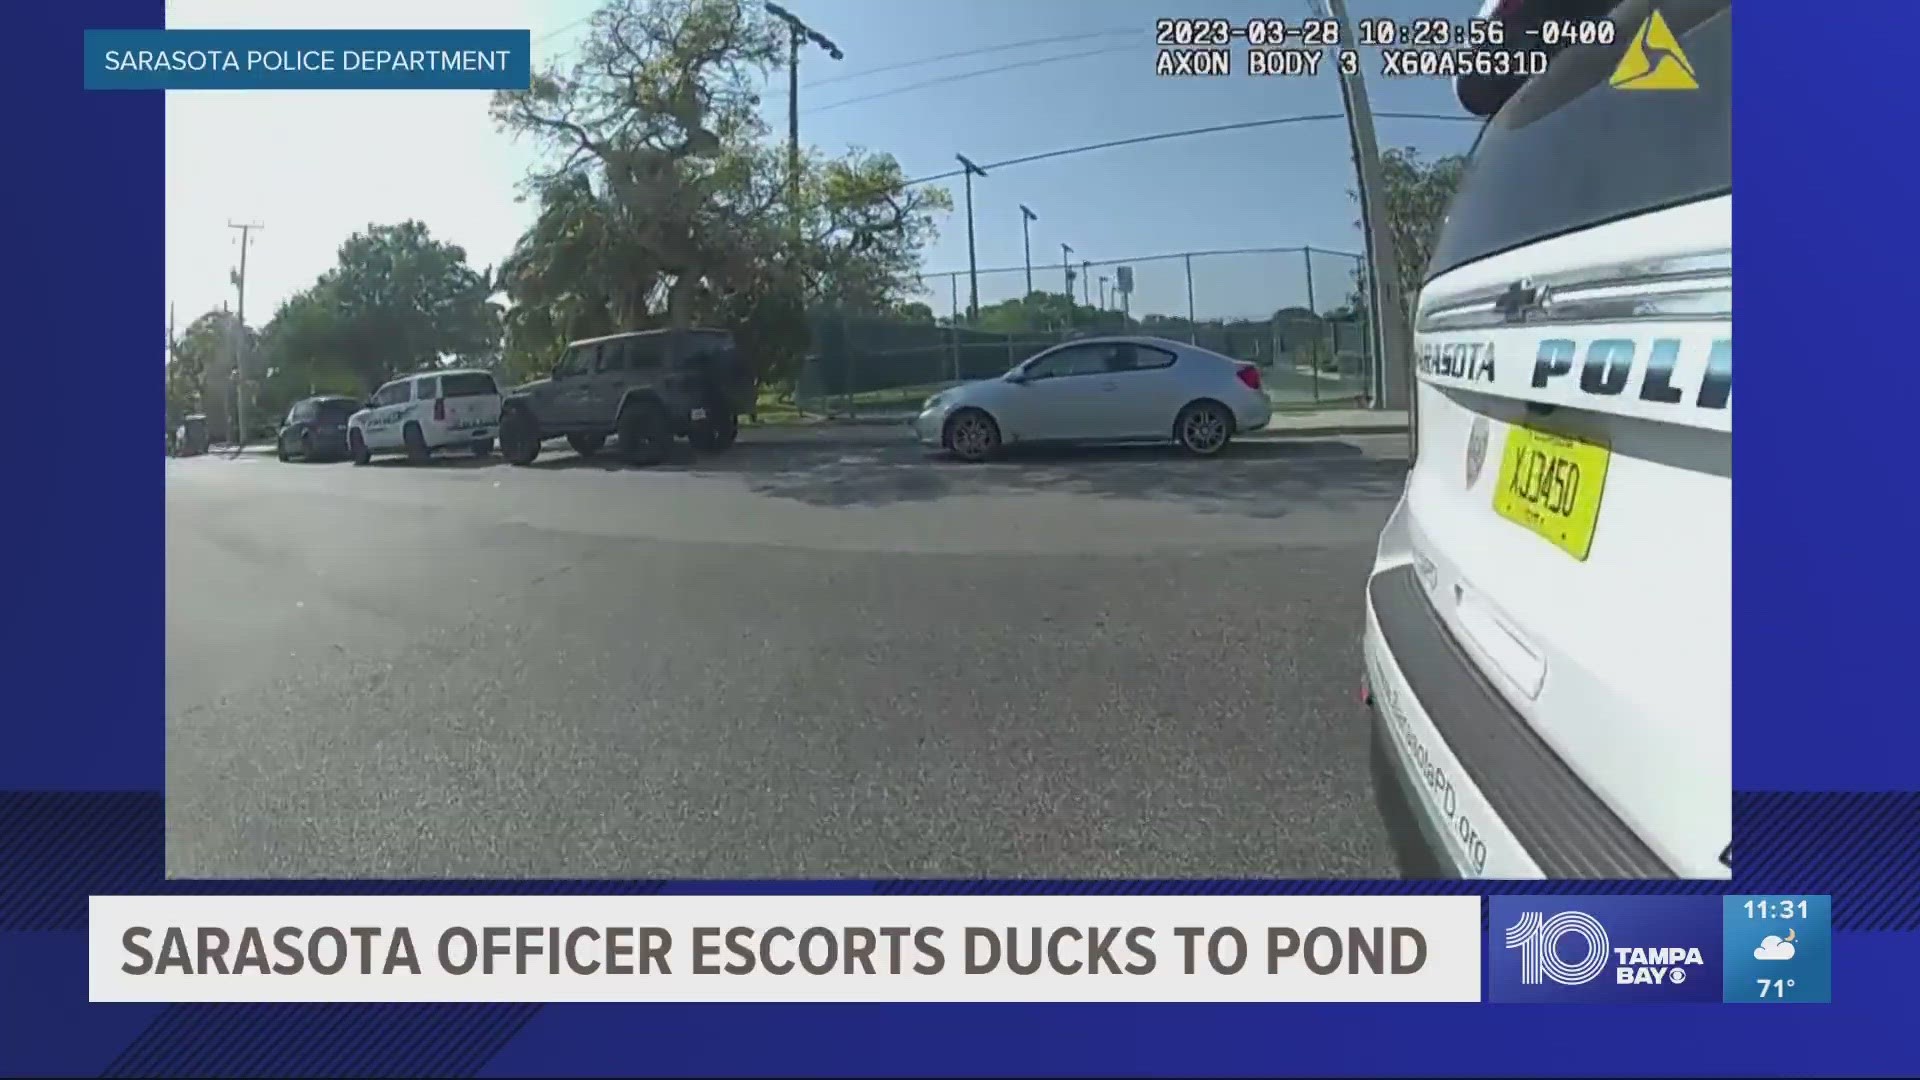 The Sarasota Police Department says the officer was able to "wing it."